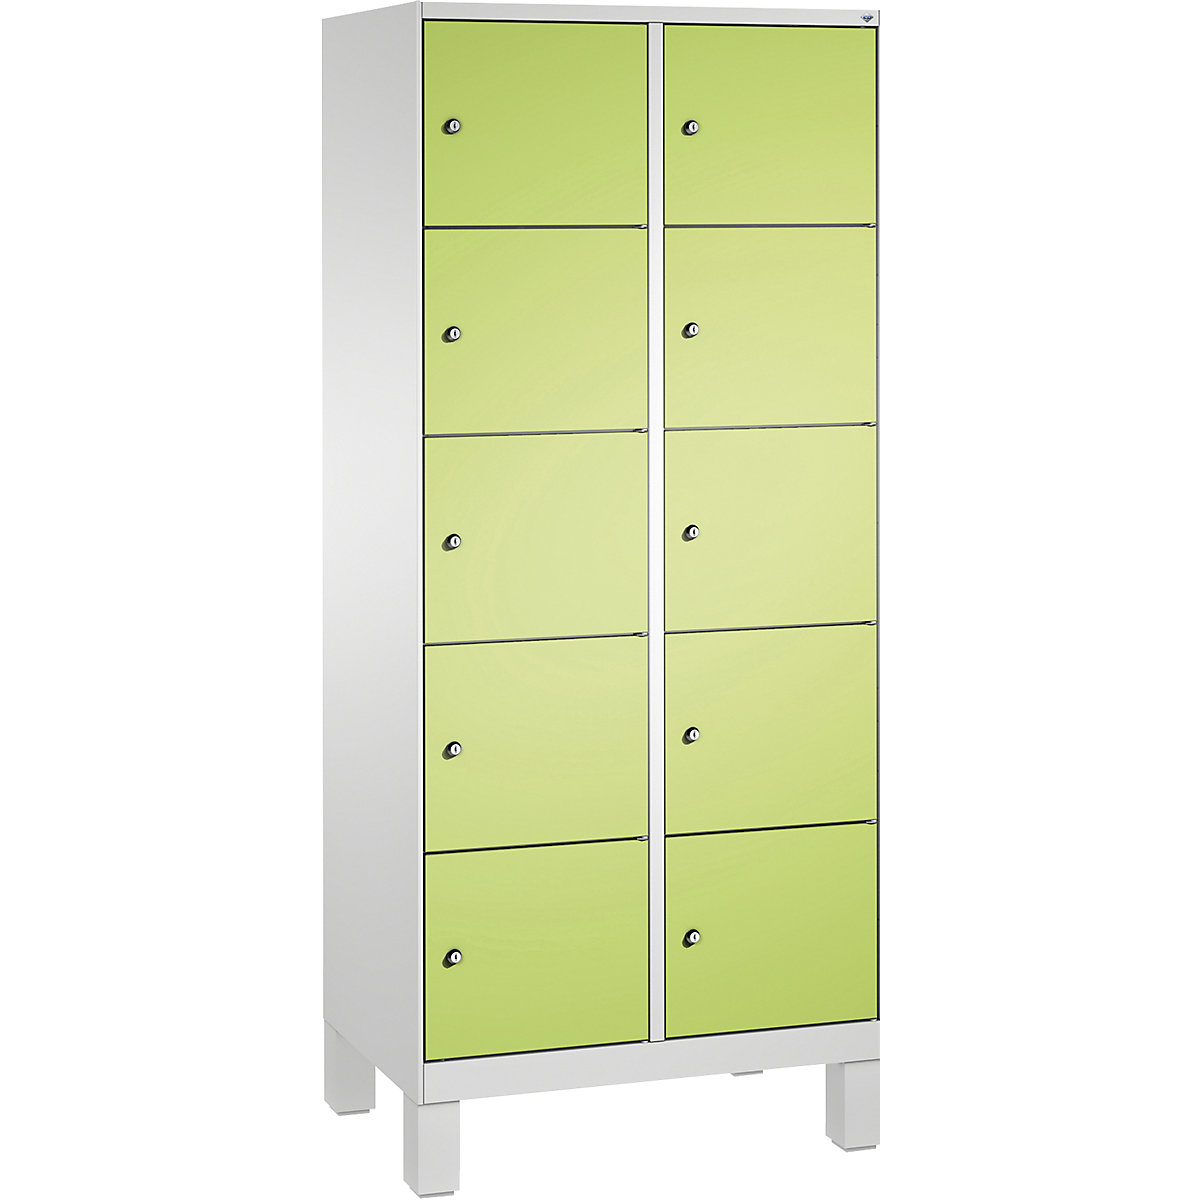 EVOLO locker unit, with feet – C+P, 2 compartments, 5 shelf compartments each, compartment width 400 mm, light grey / viridian green-12